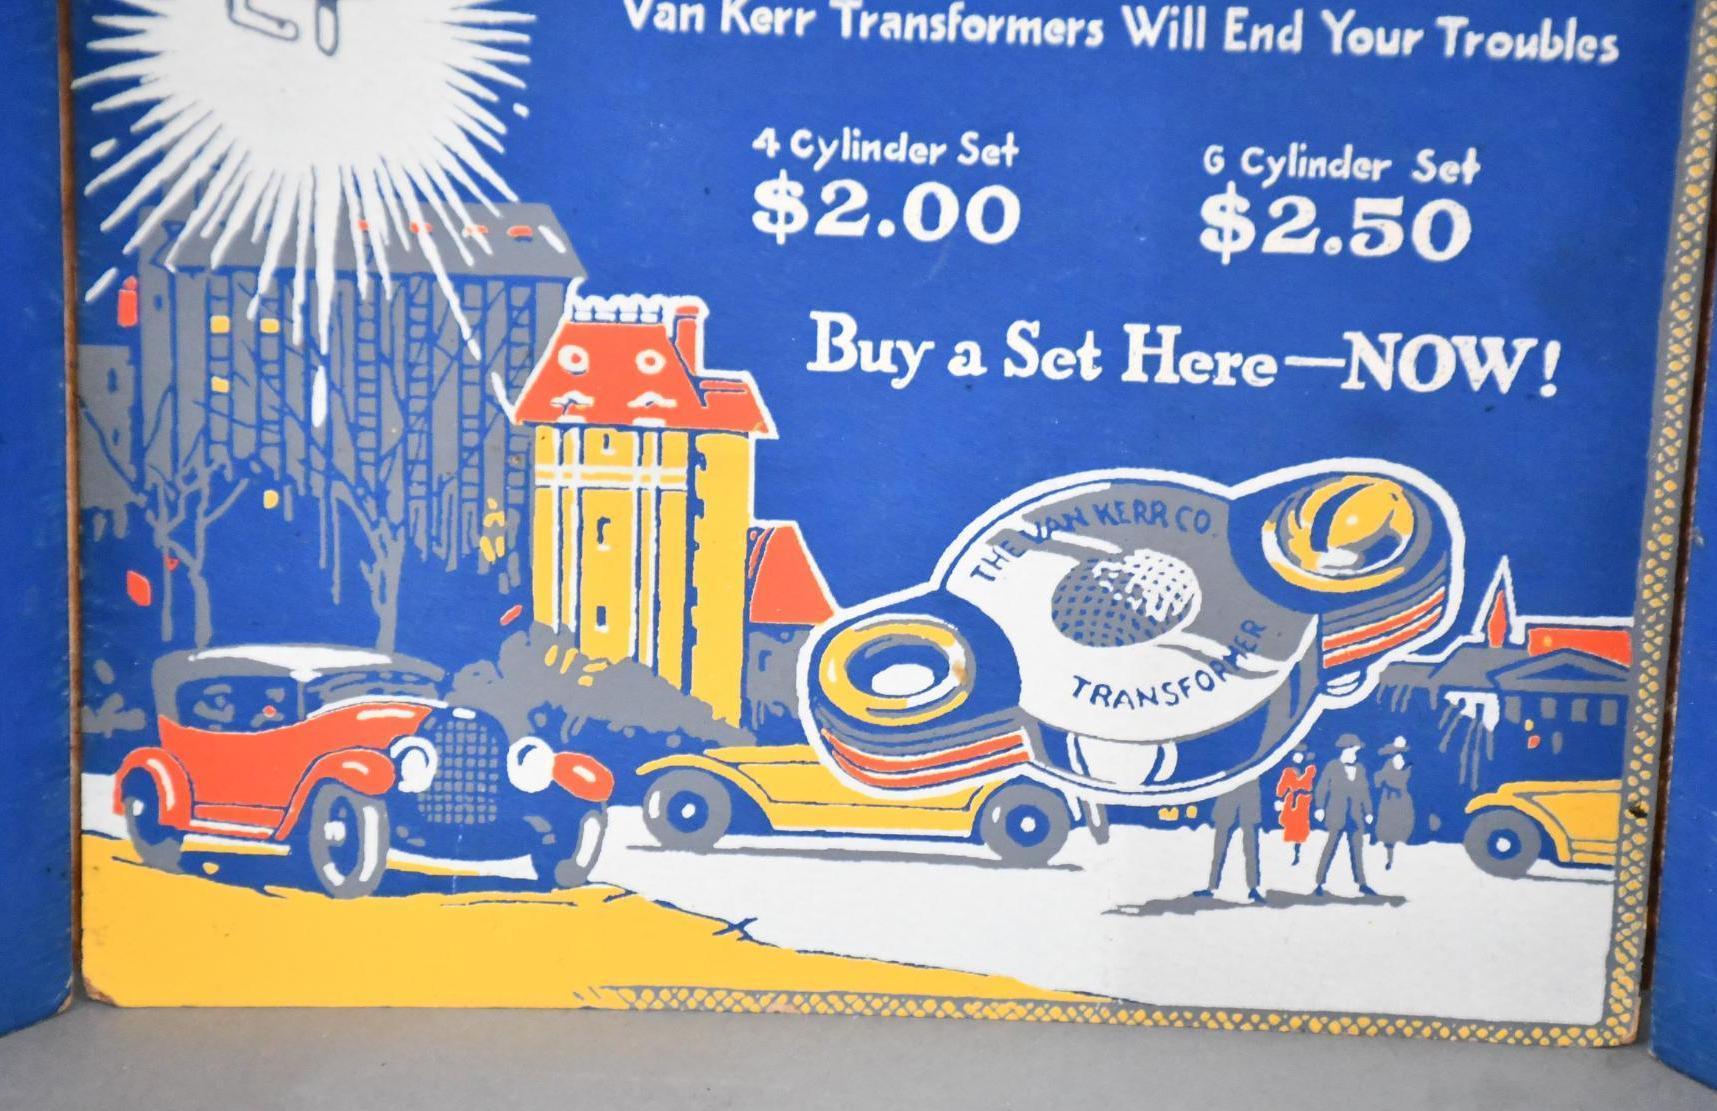 Van Kerr Transformers "Your Troubles are Over" Cardboard Counter Display